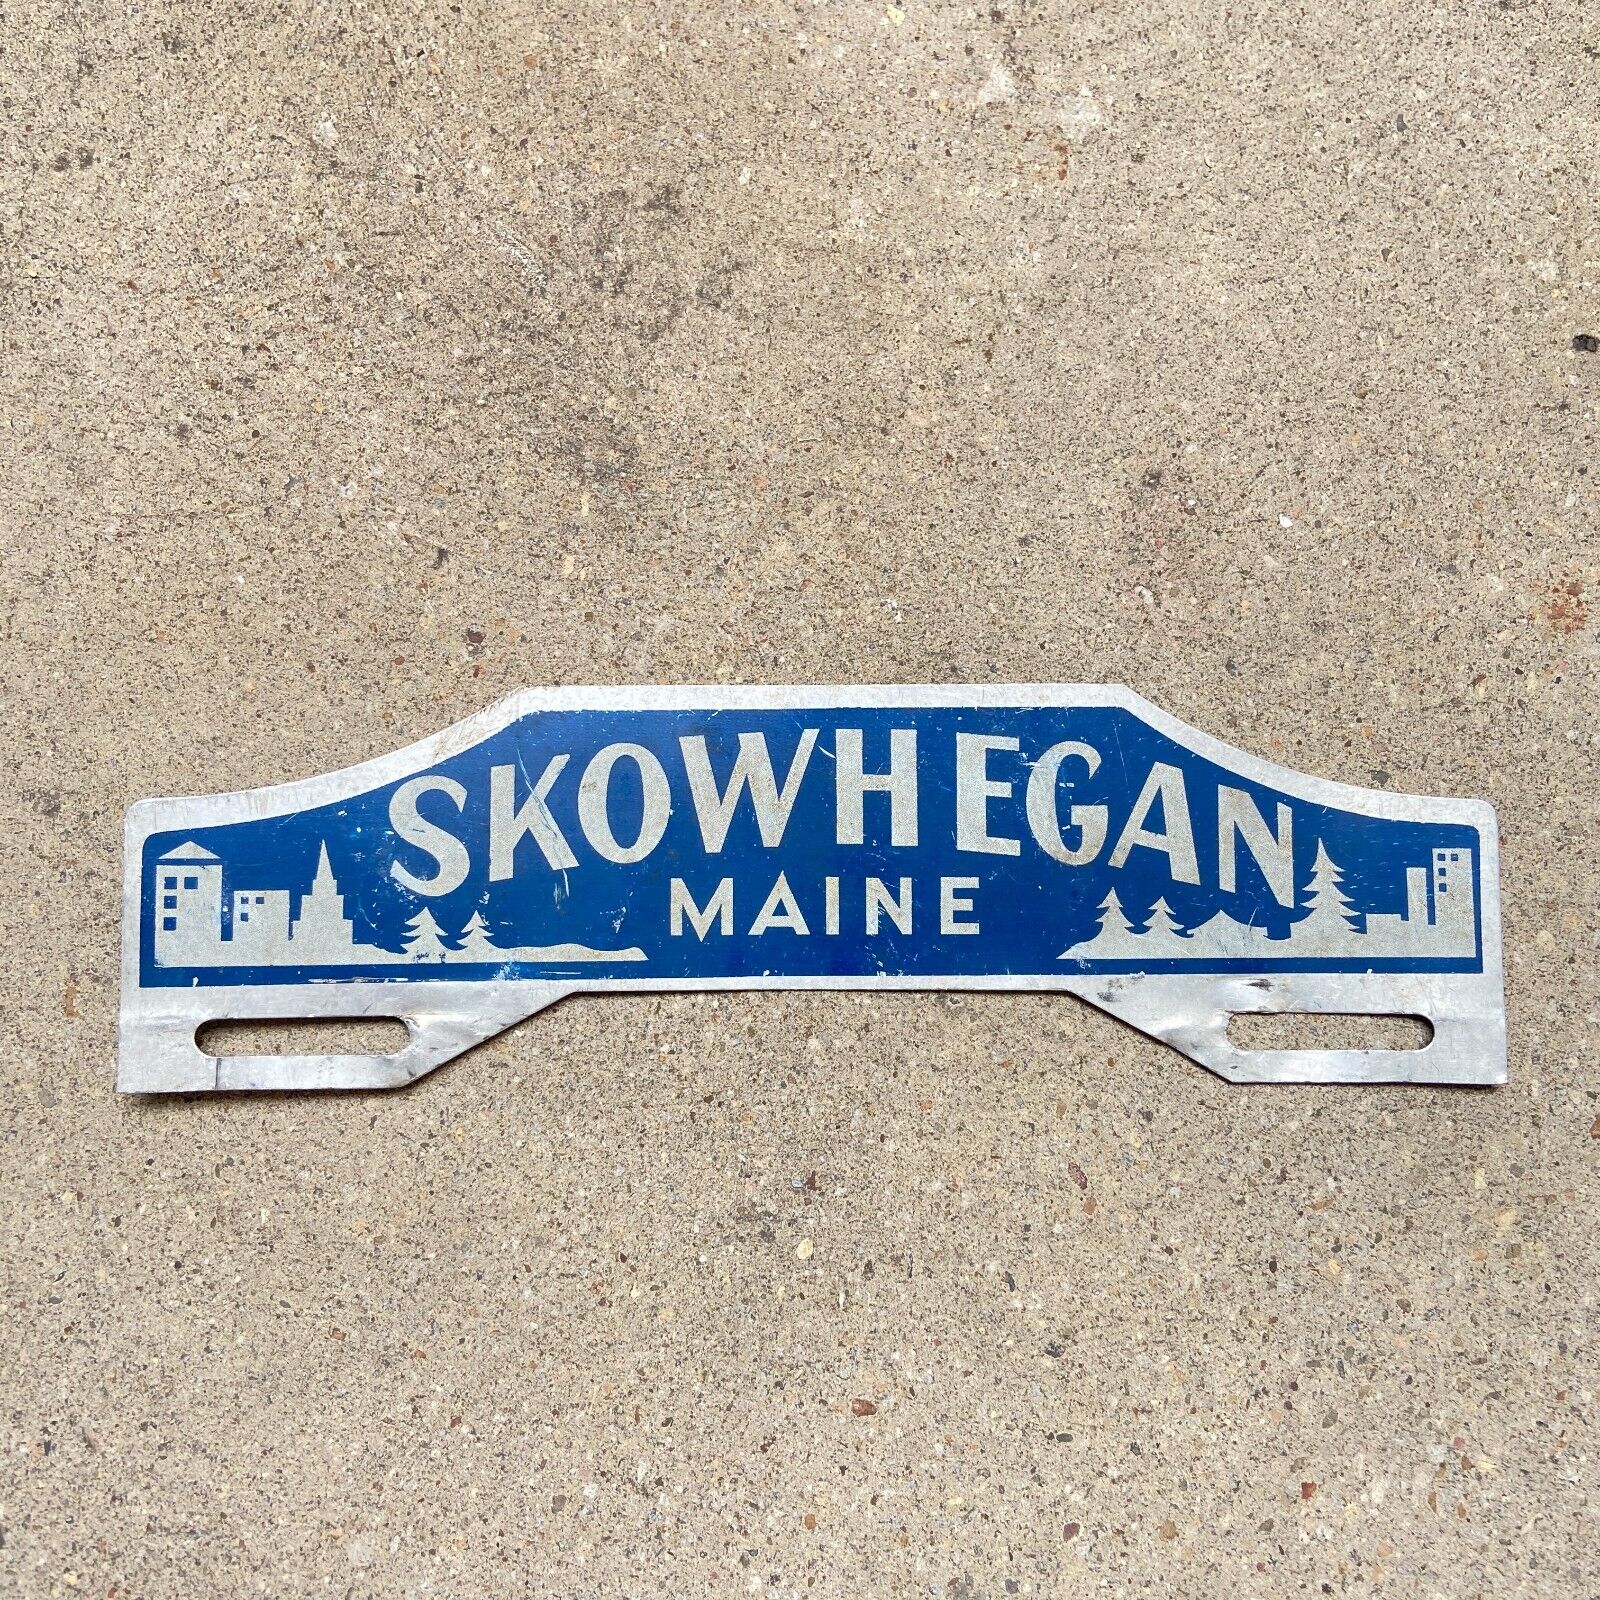 1950s Era Skowhegan Maine License Plate Topper Outdoors Forest Skiing Nature